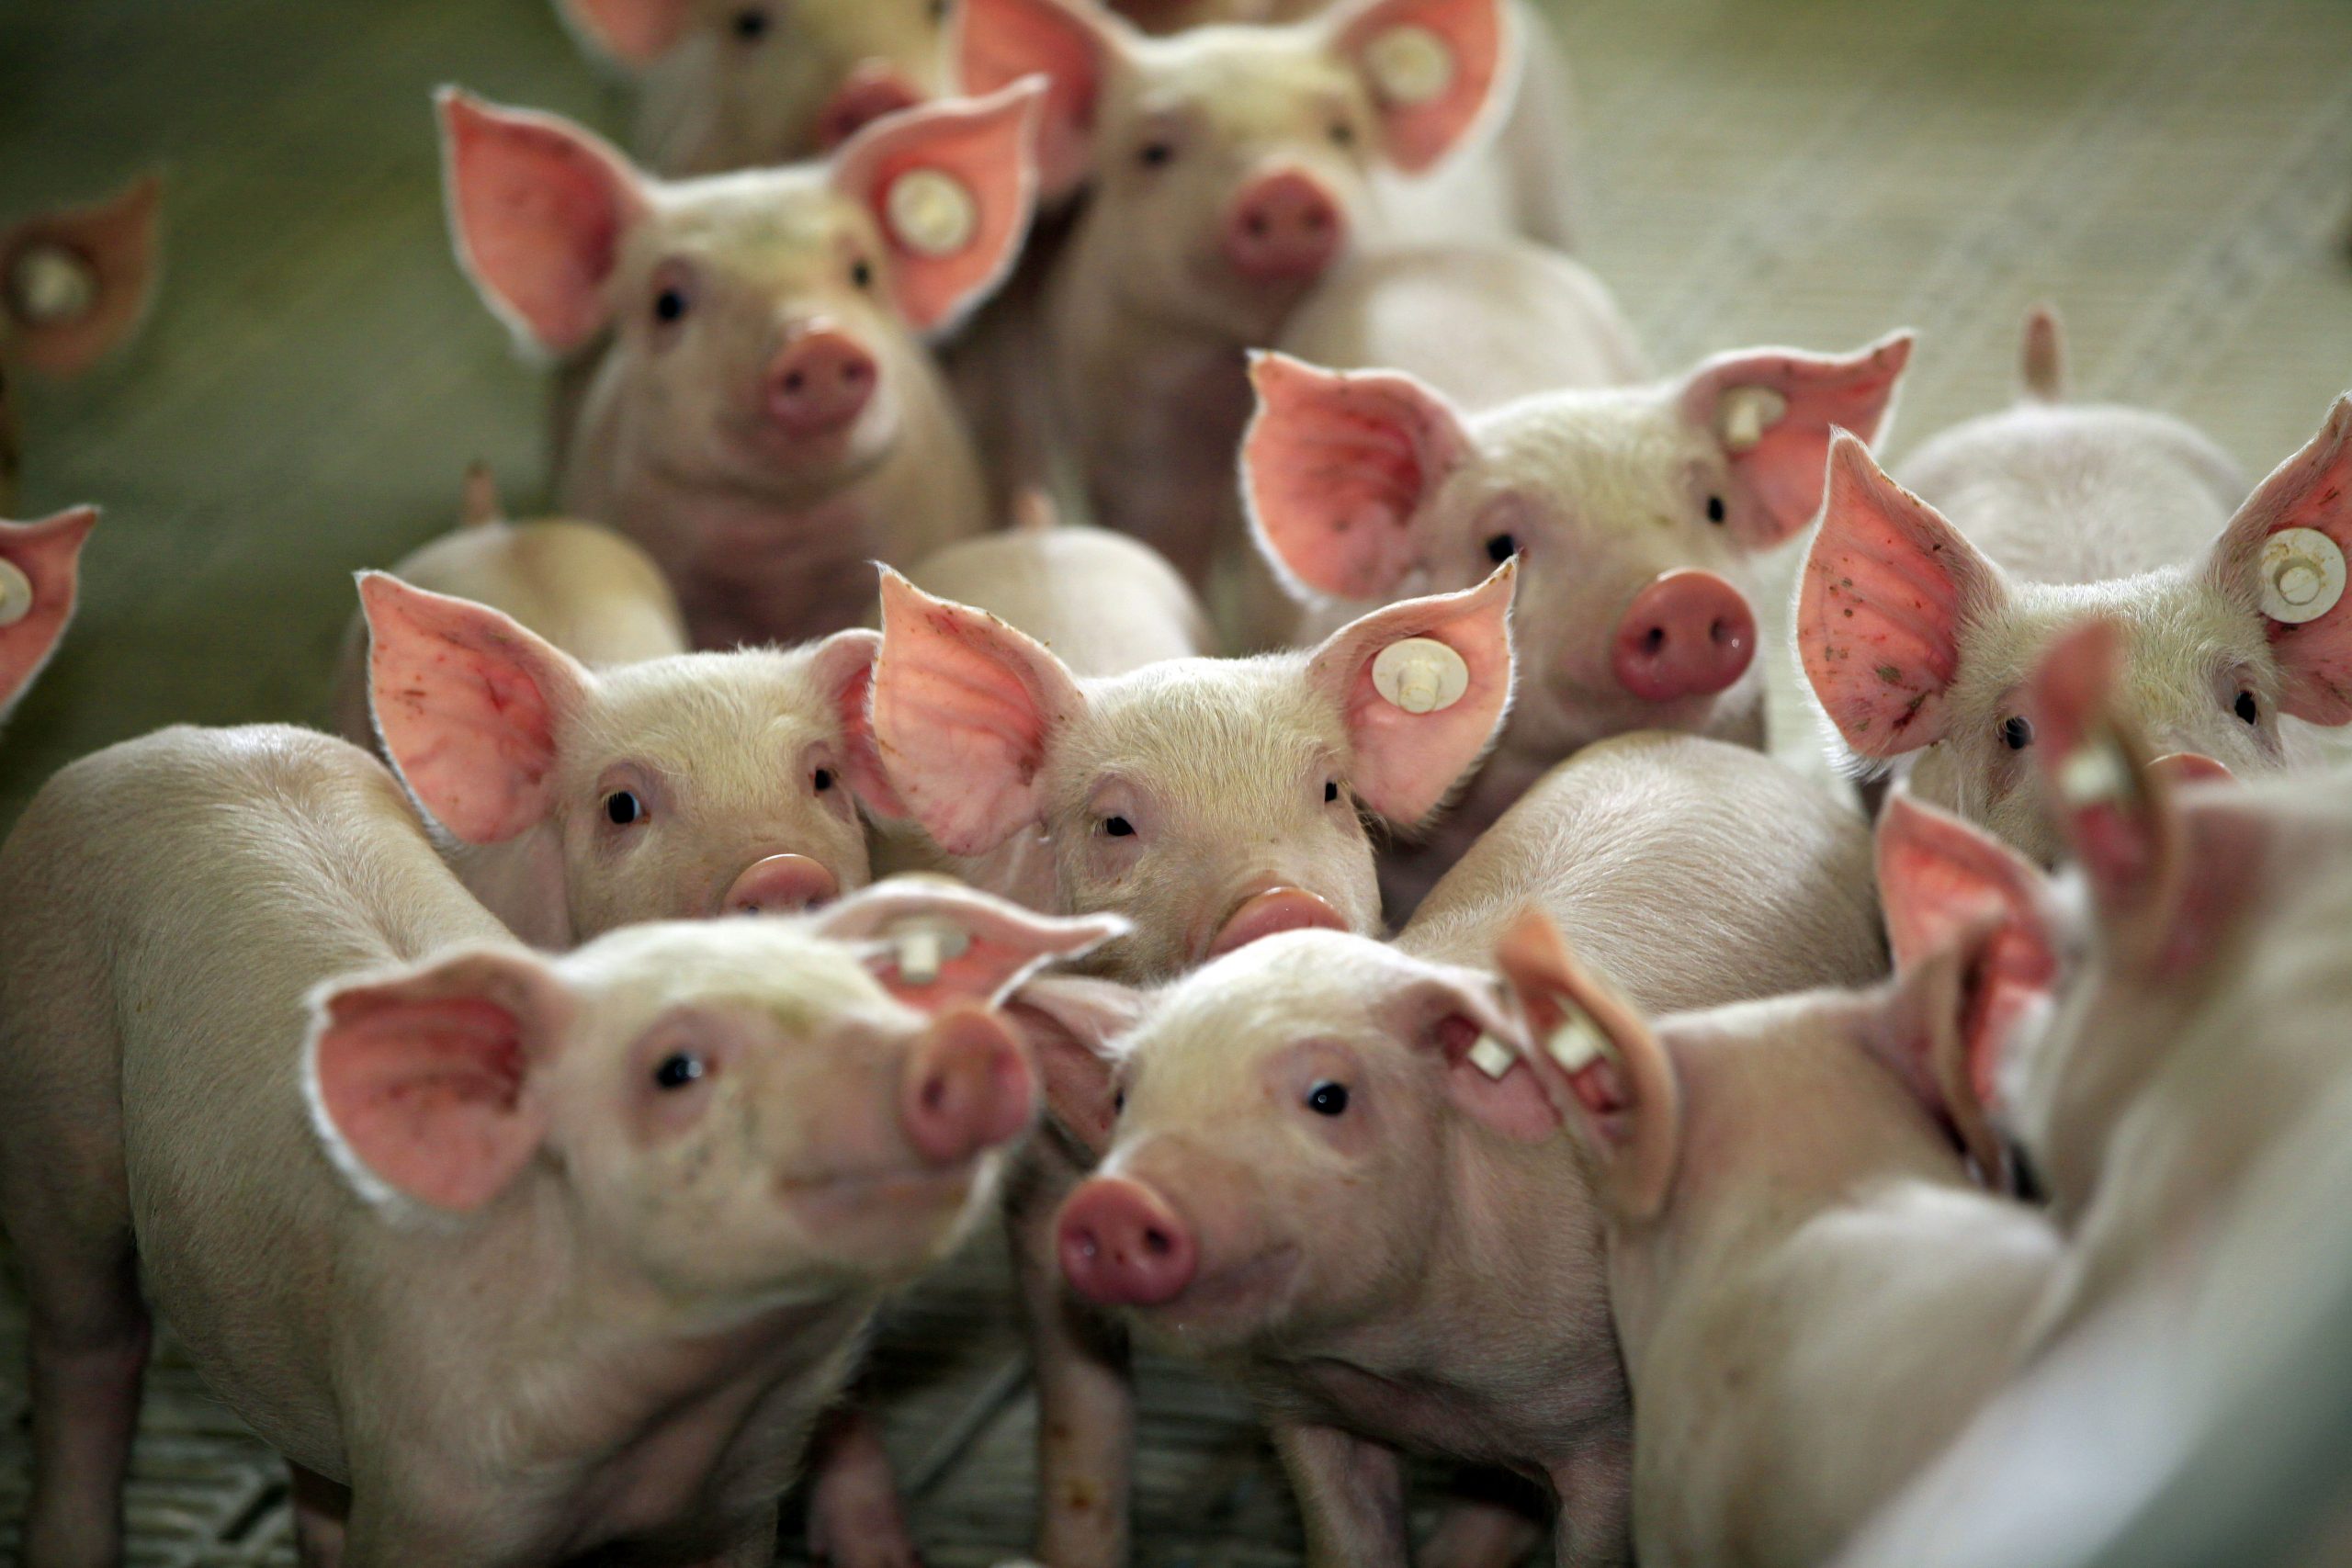 Replacing antibiotics and ZnO in weaning piglets. Photo: Henk Riswick